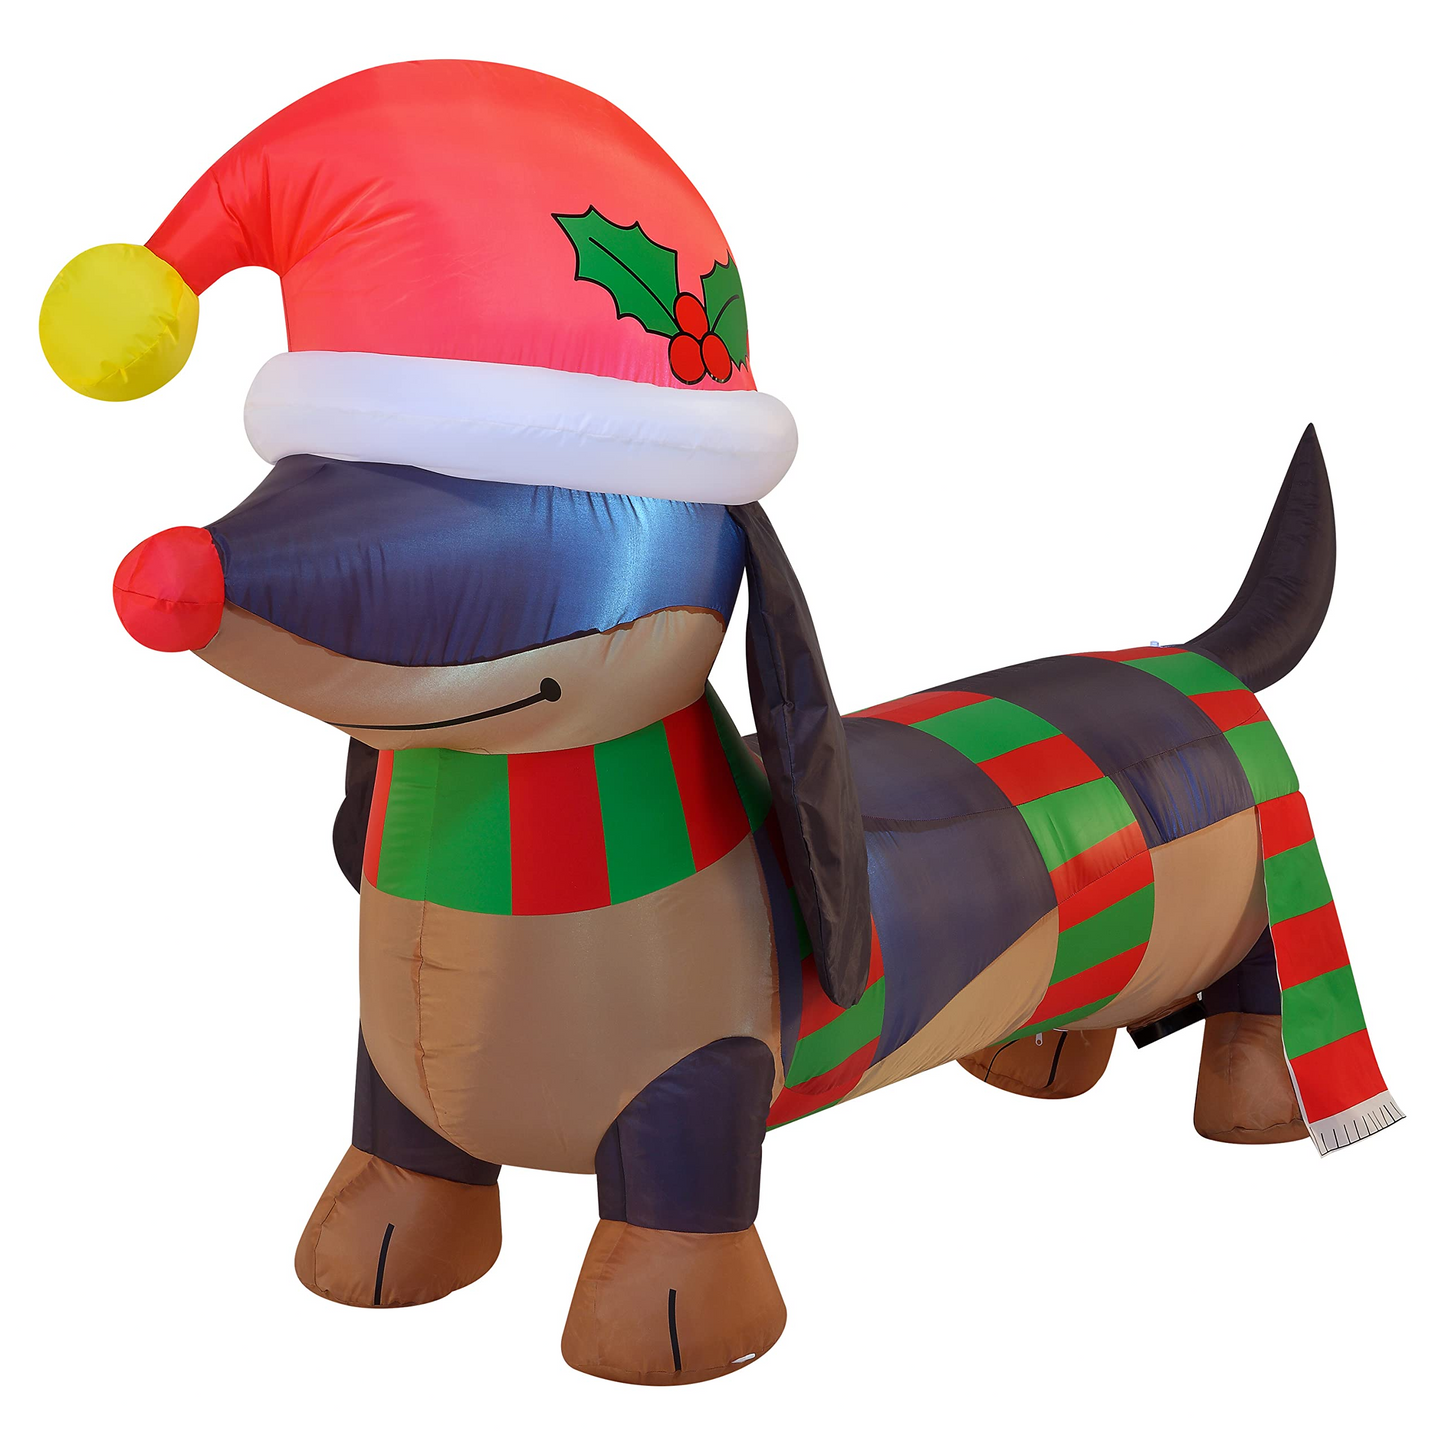 6ft Weiner Dog Eyes covered by a hug hat Christmas Inflatable